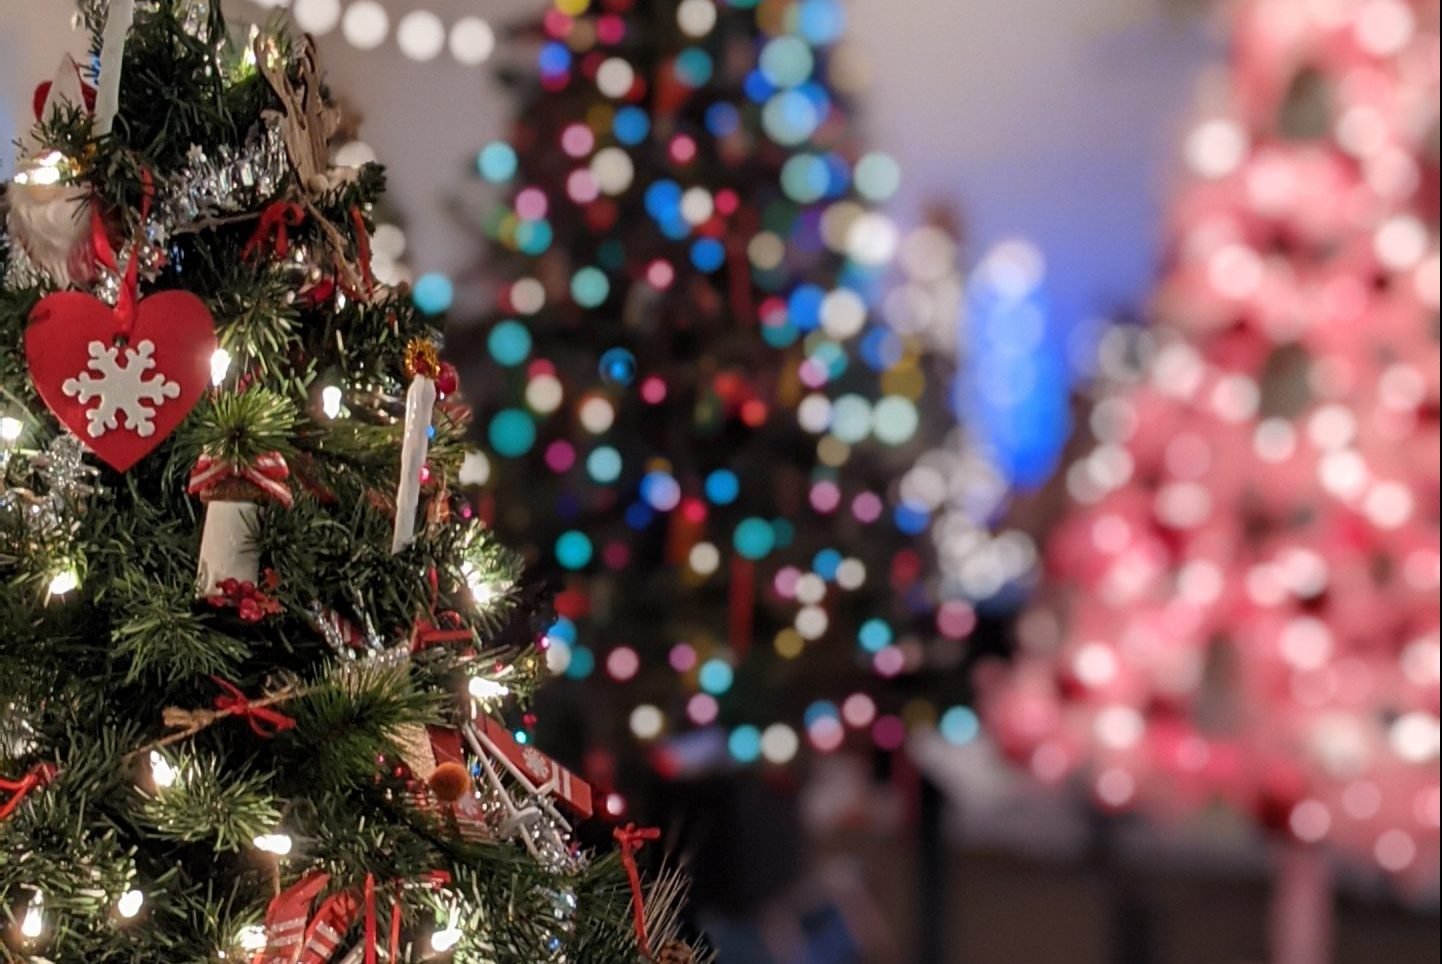 Christmas tree festival at Massachusetts Horticultural Society in Wellesley